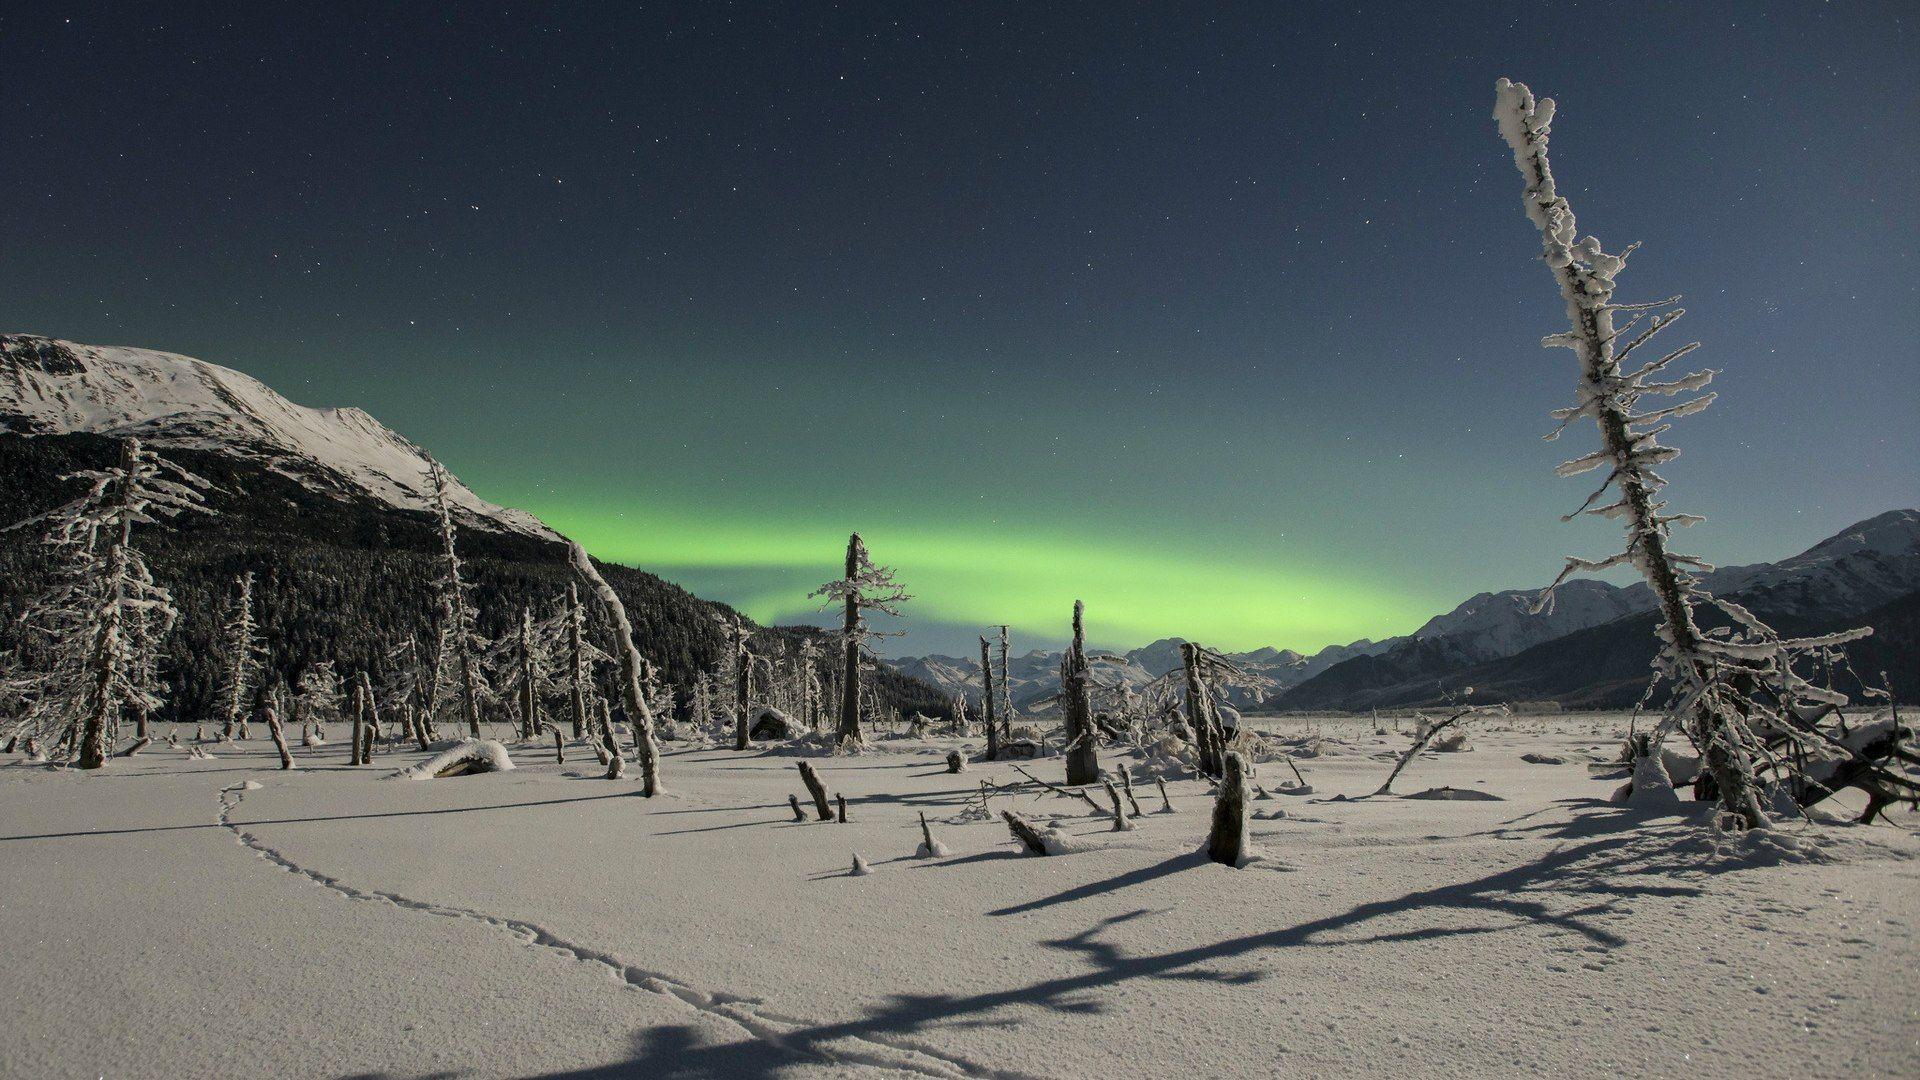 Northern lights over snowy wilderness wallpaper and image